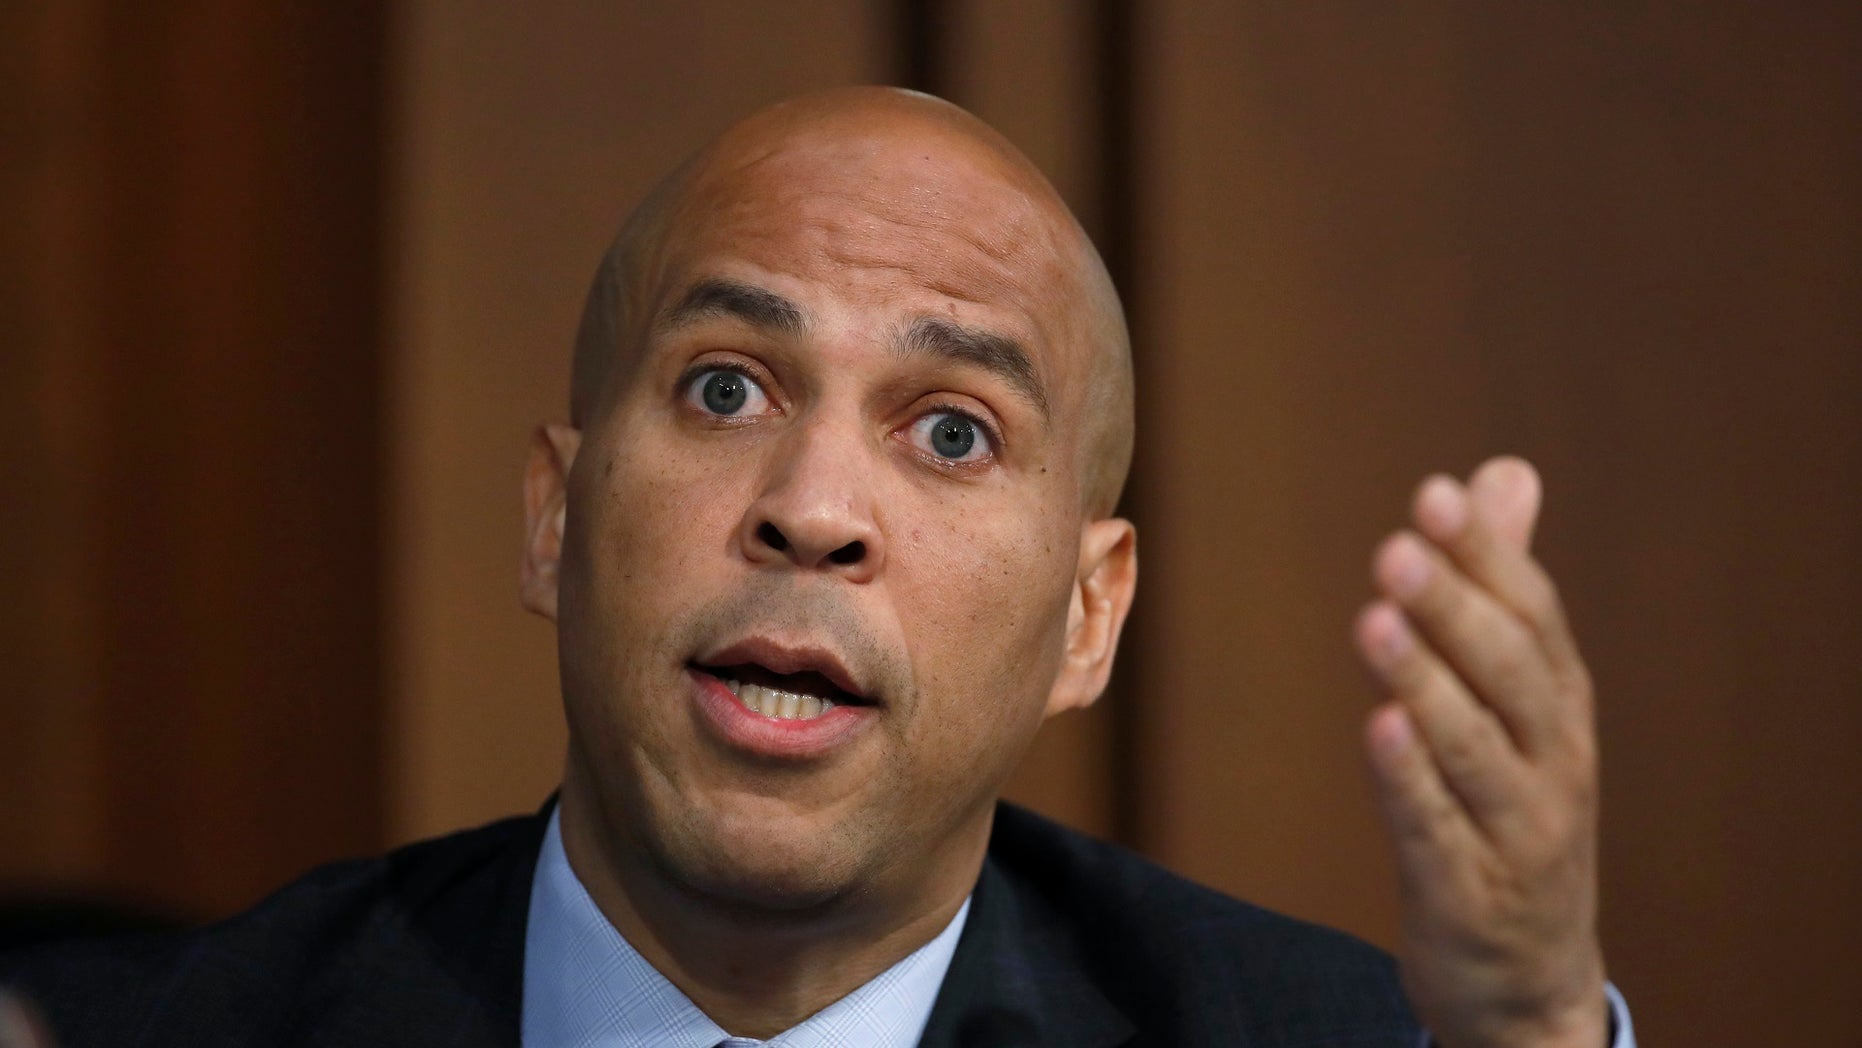 Cory Booker jumps into 2020 White House race